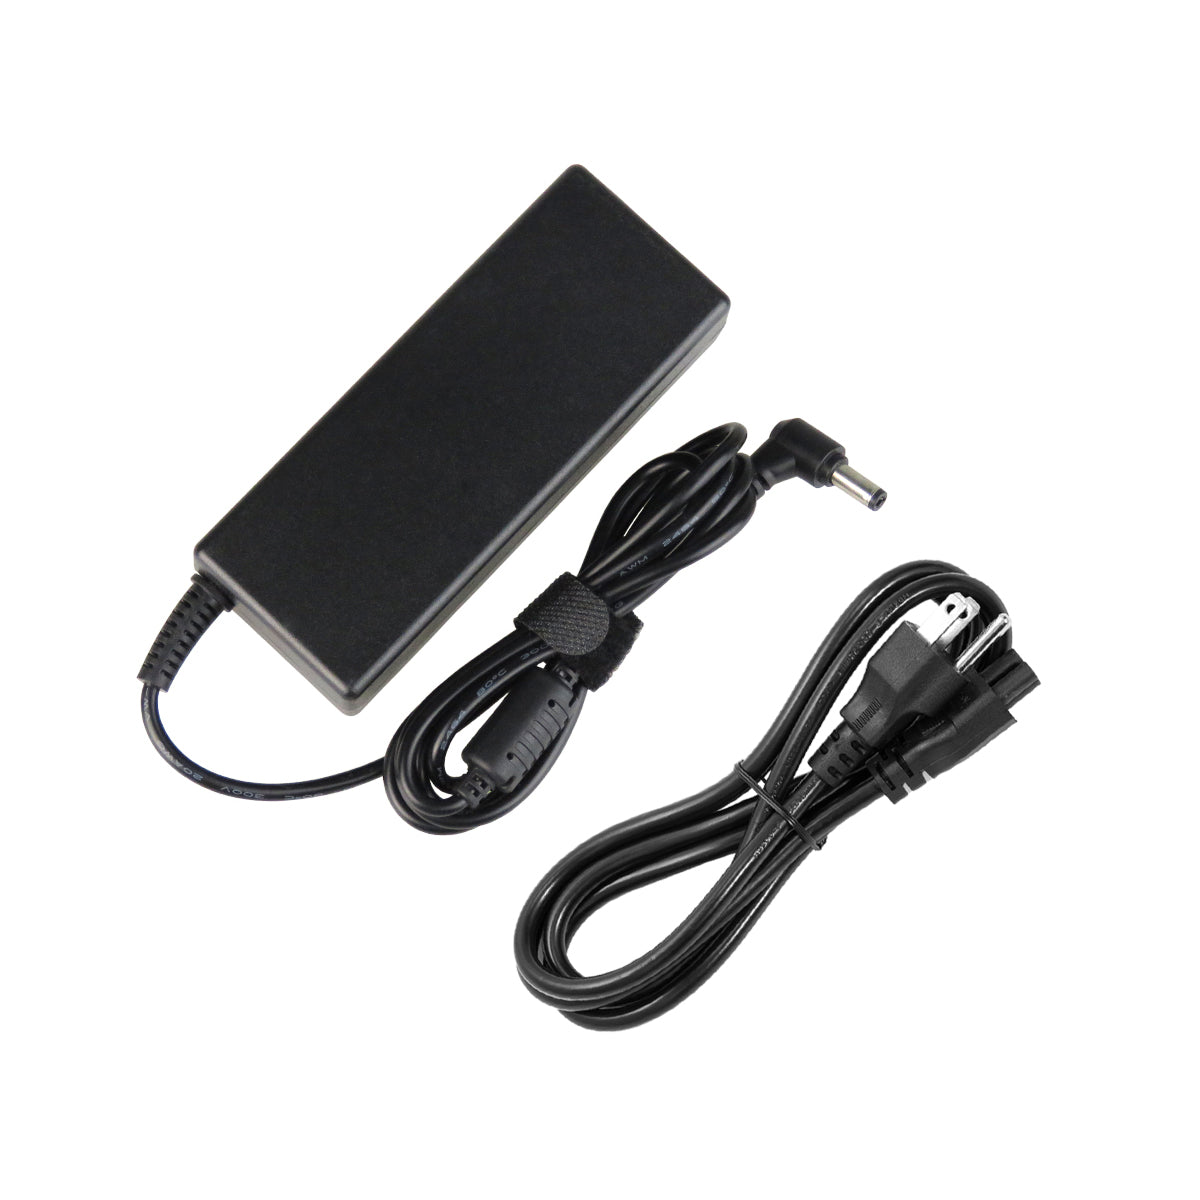 AC Adapter Charger for ASUS U58CM Notebook.